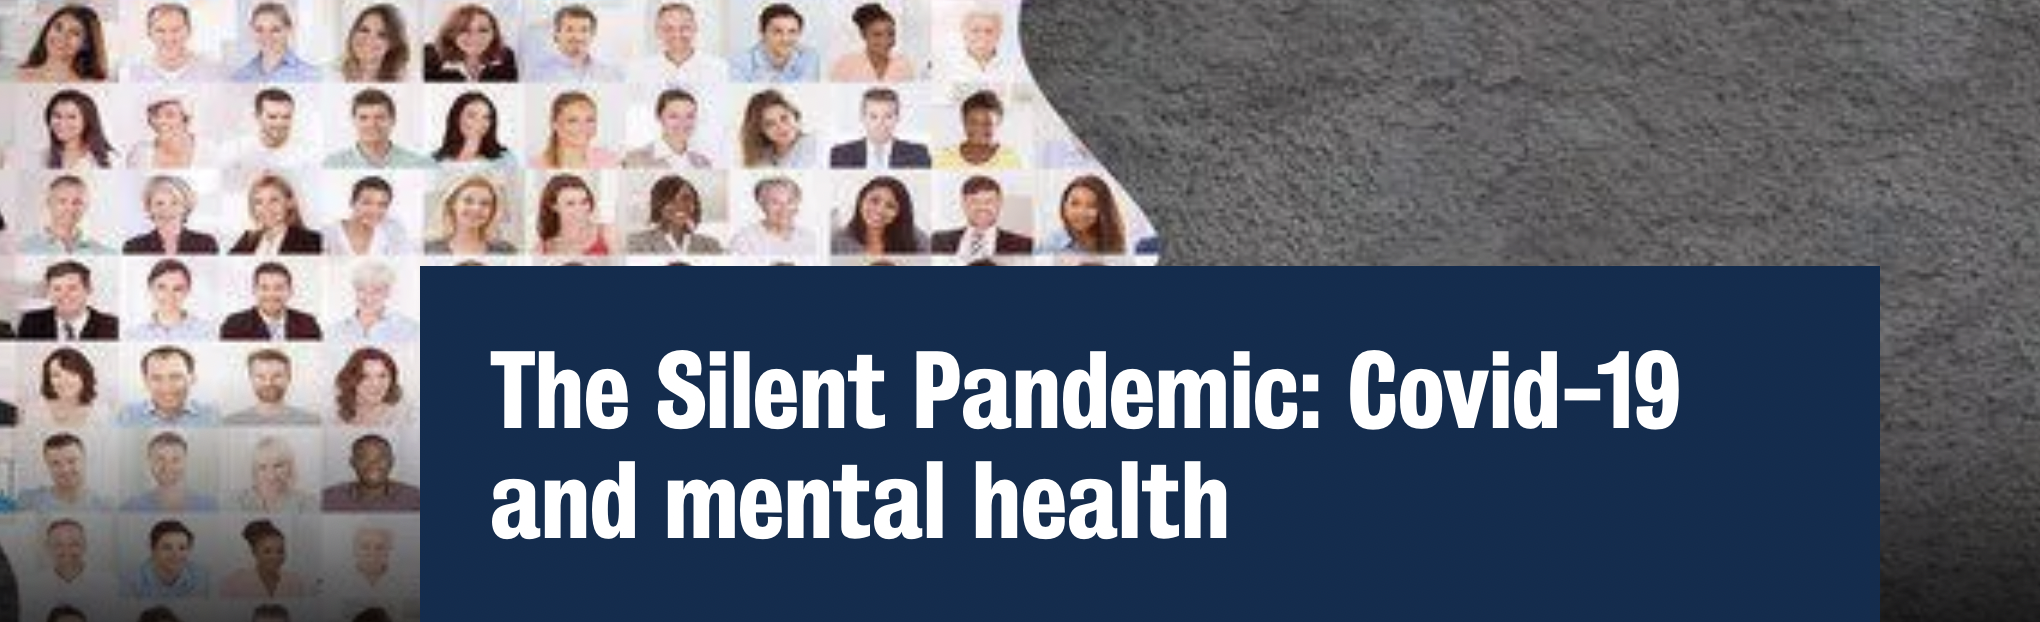 The Silent Pandemic: Covid-19 and mental health